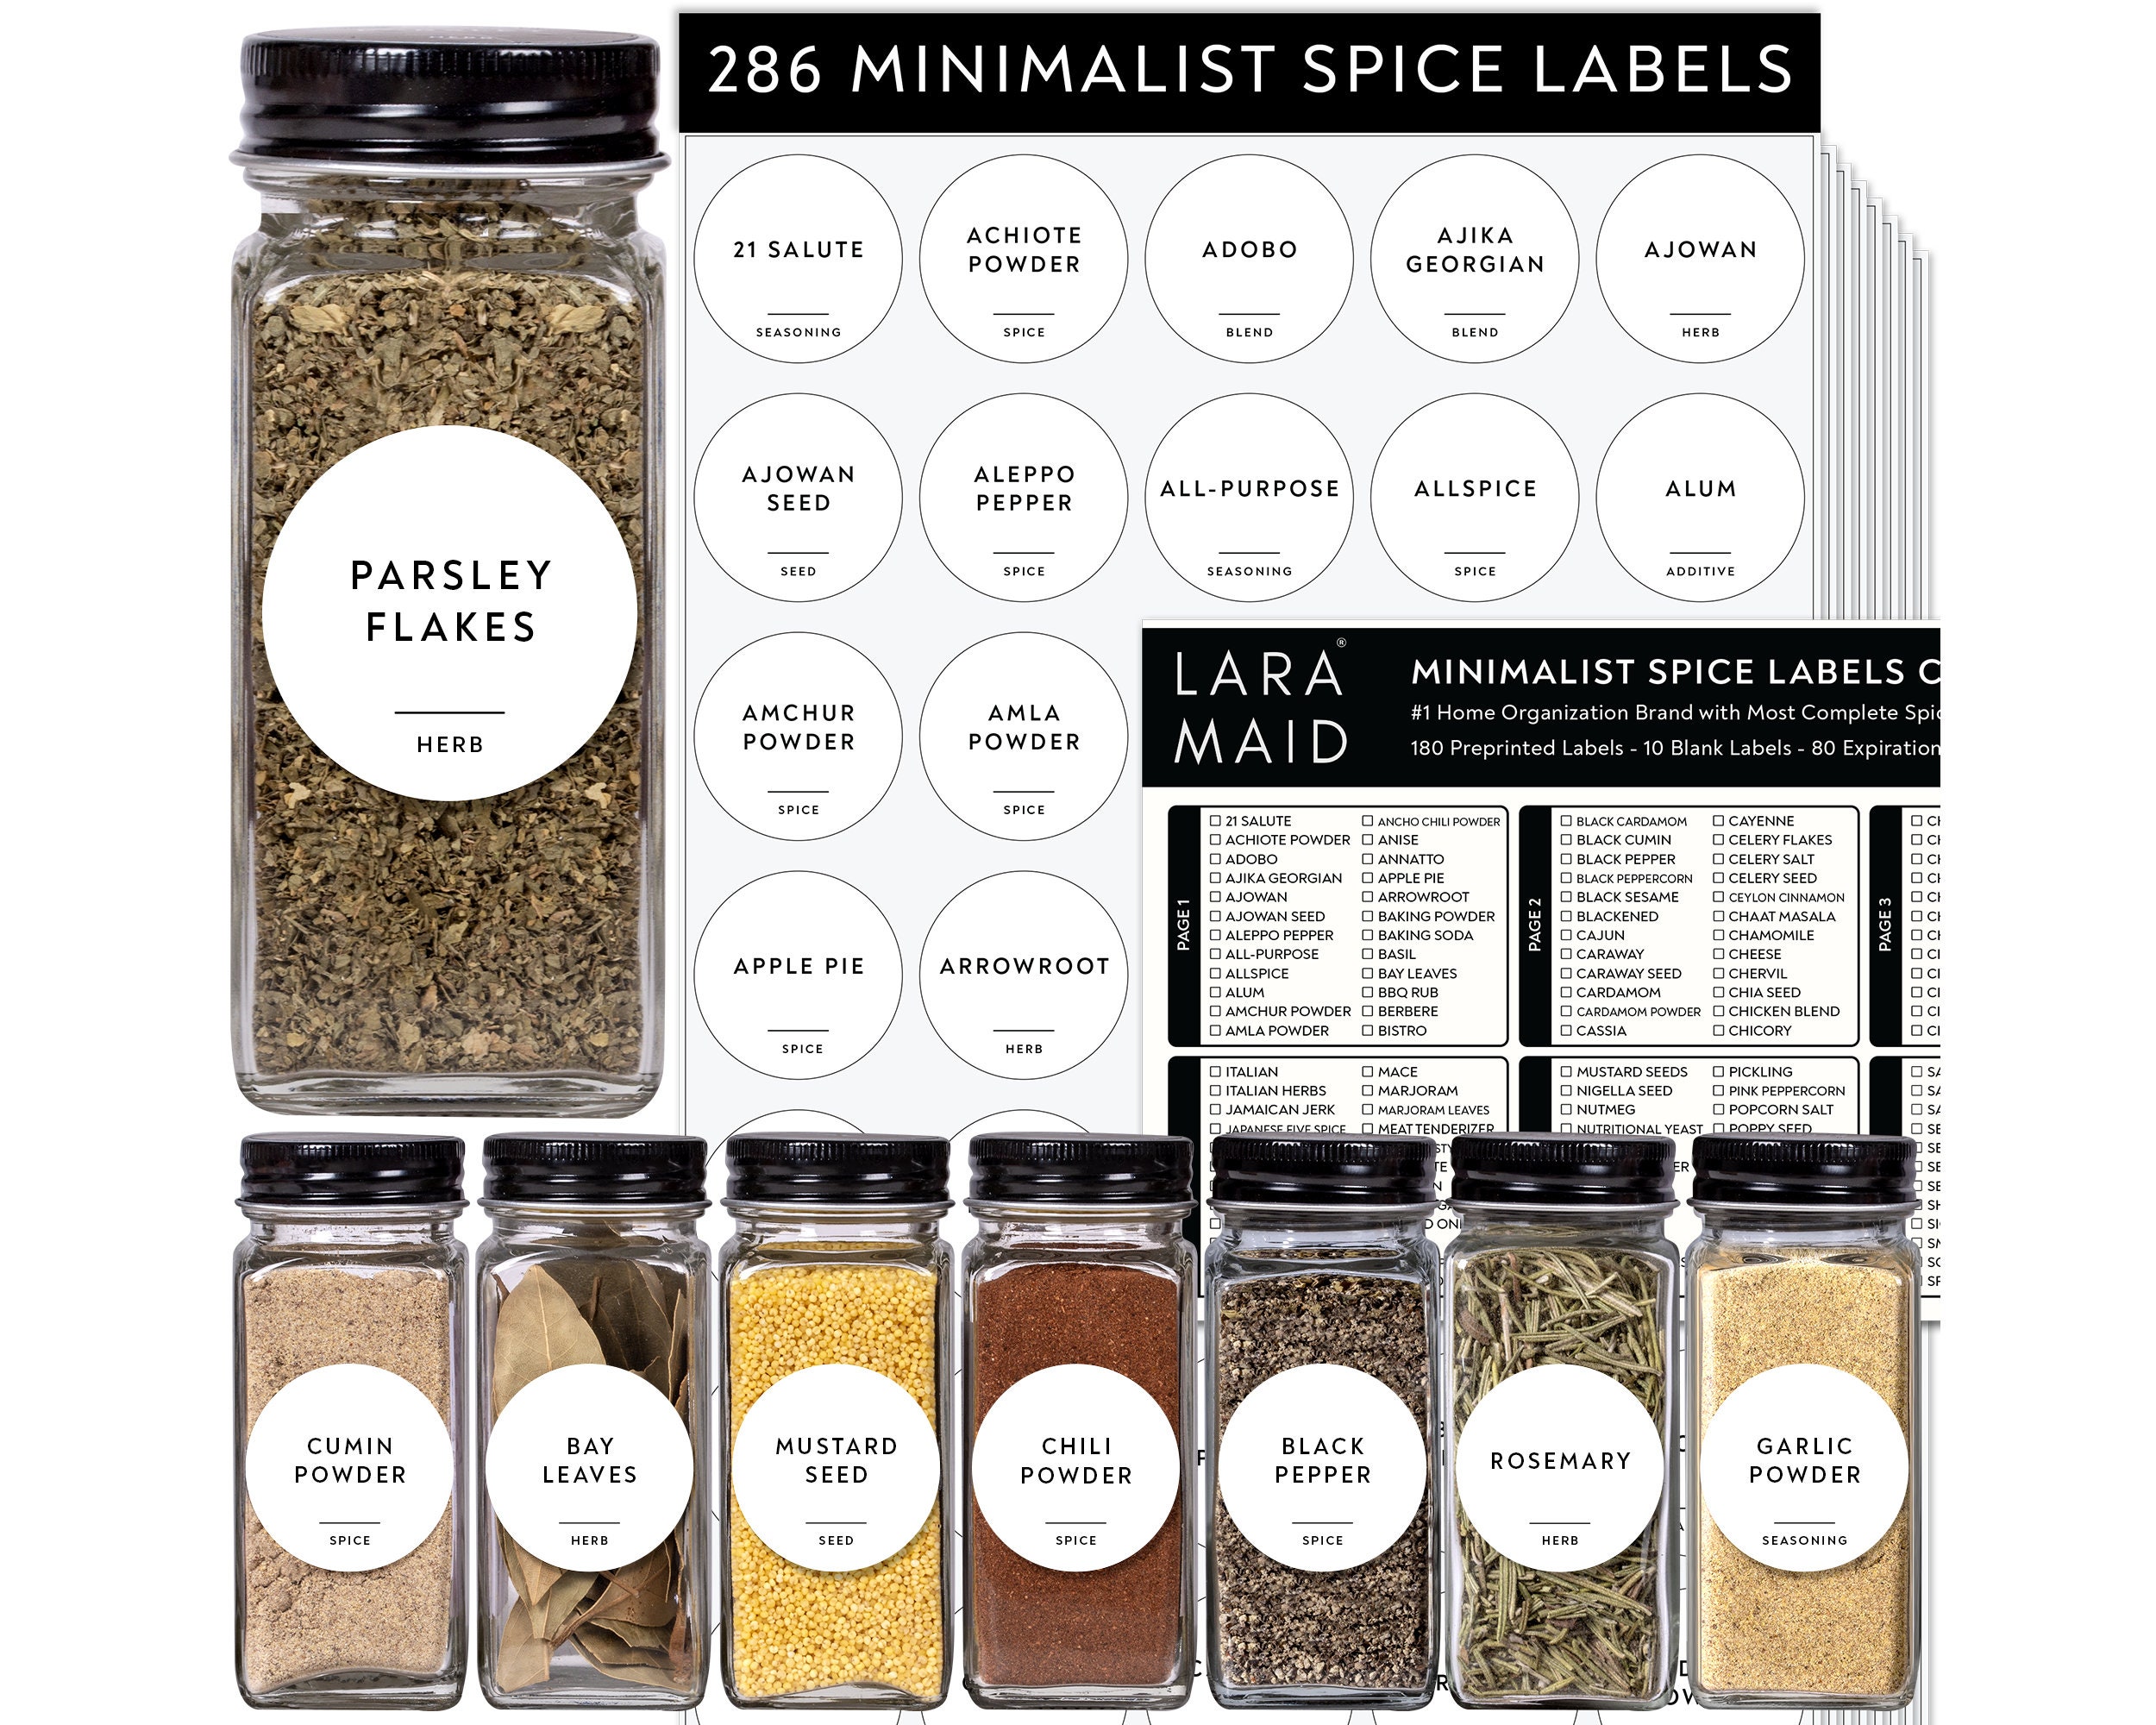 44 Square Spice Labels for Spices, Hindi + English